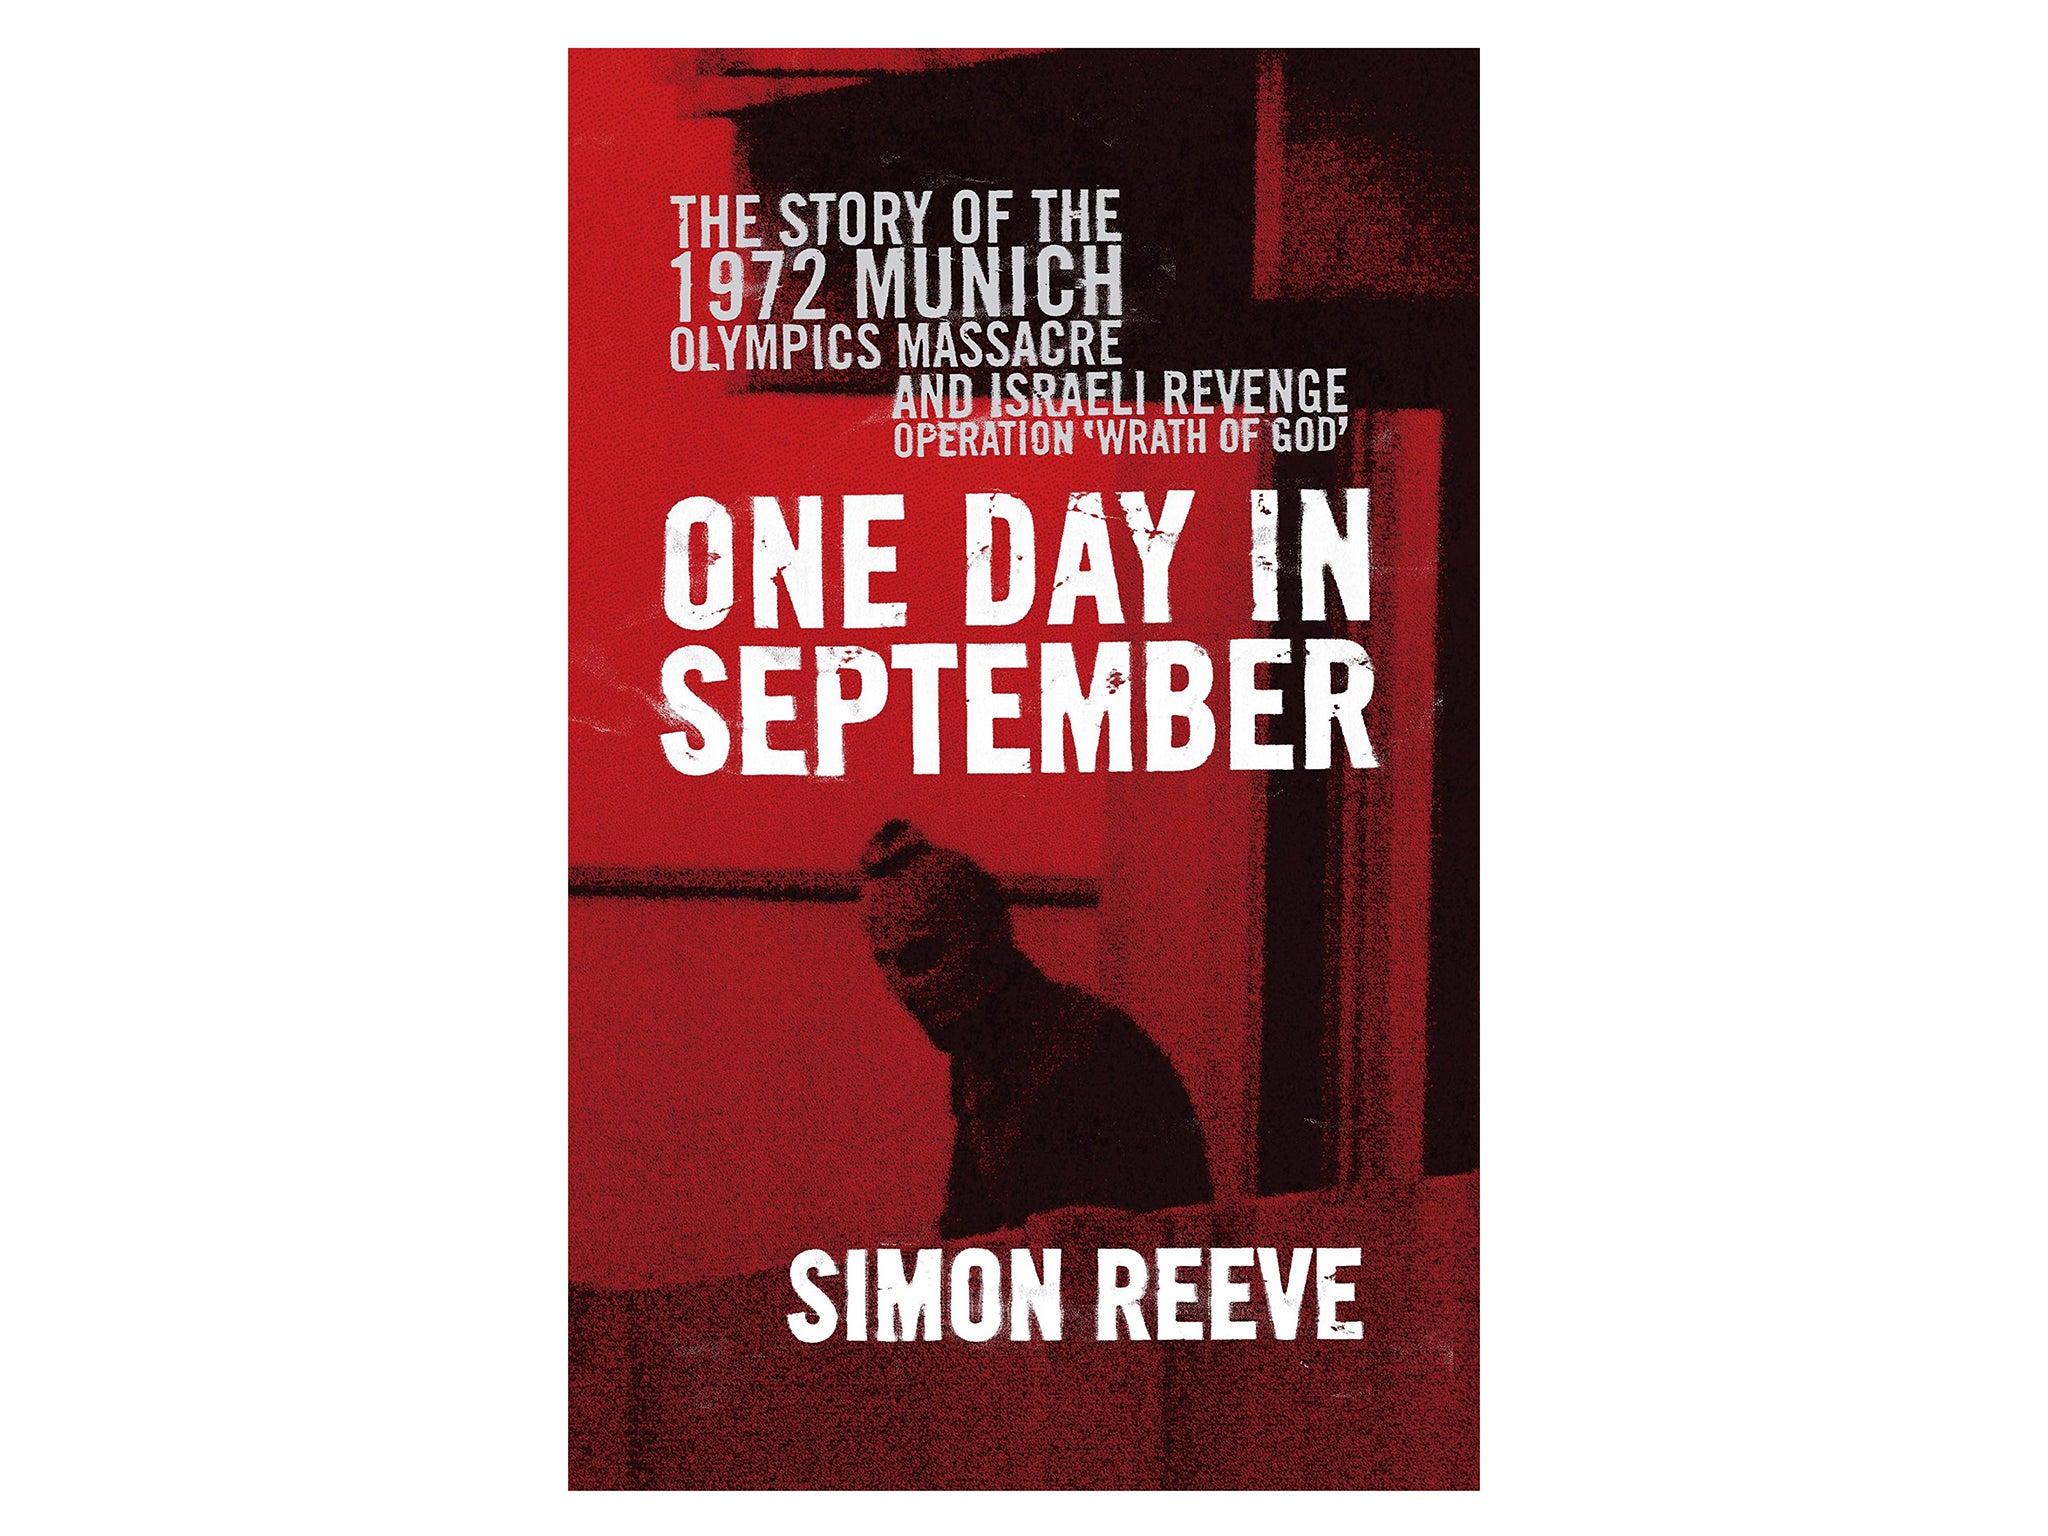 simon-reeve-one-day-in-september-indybest.jpg